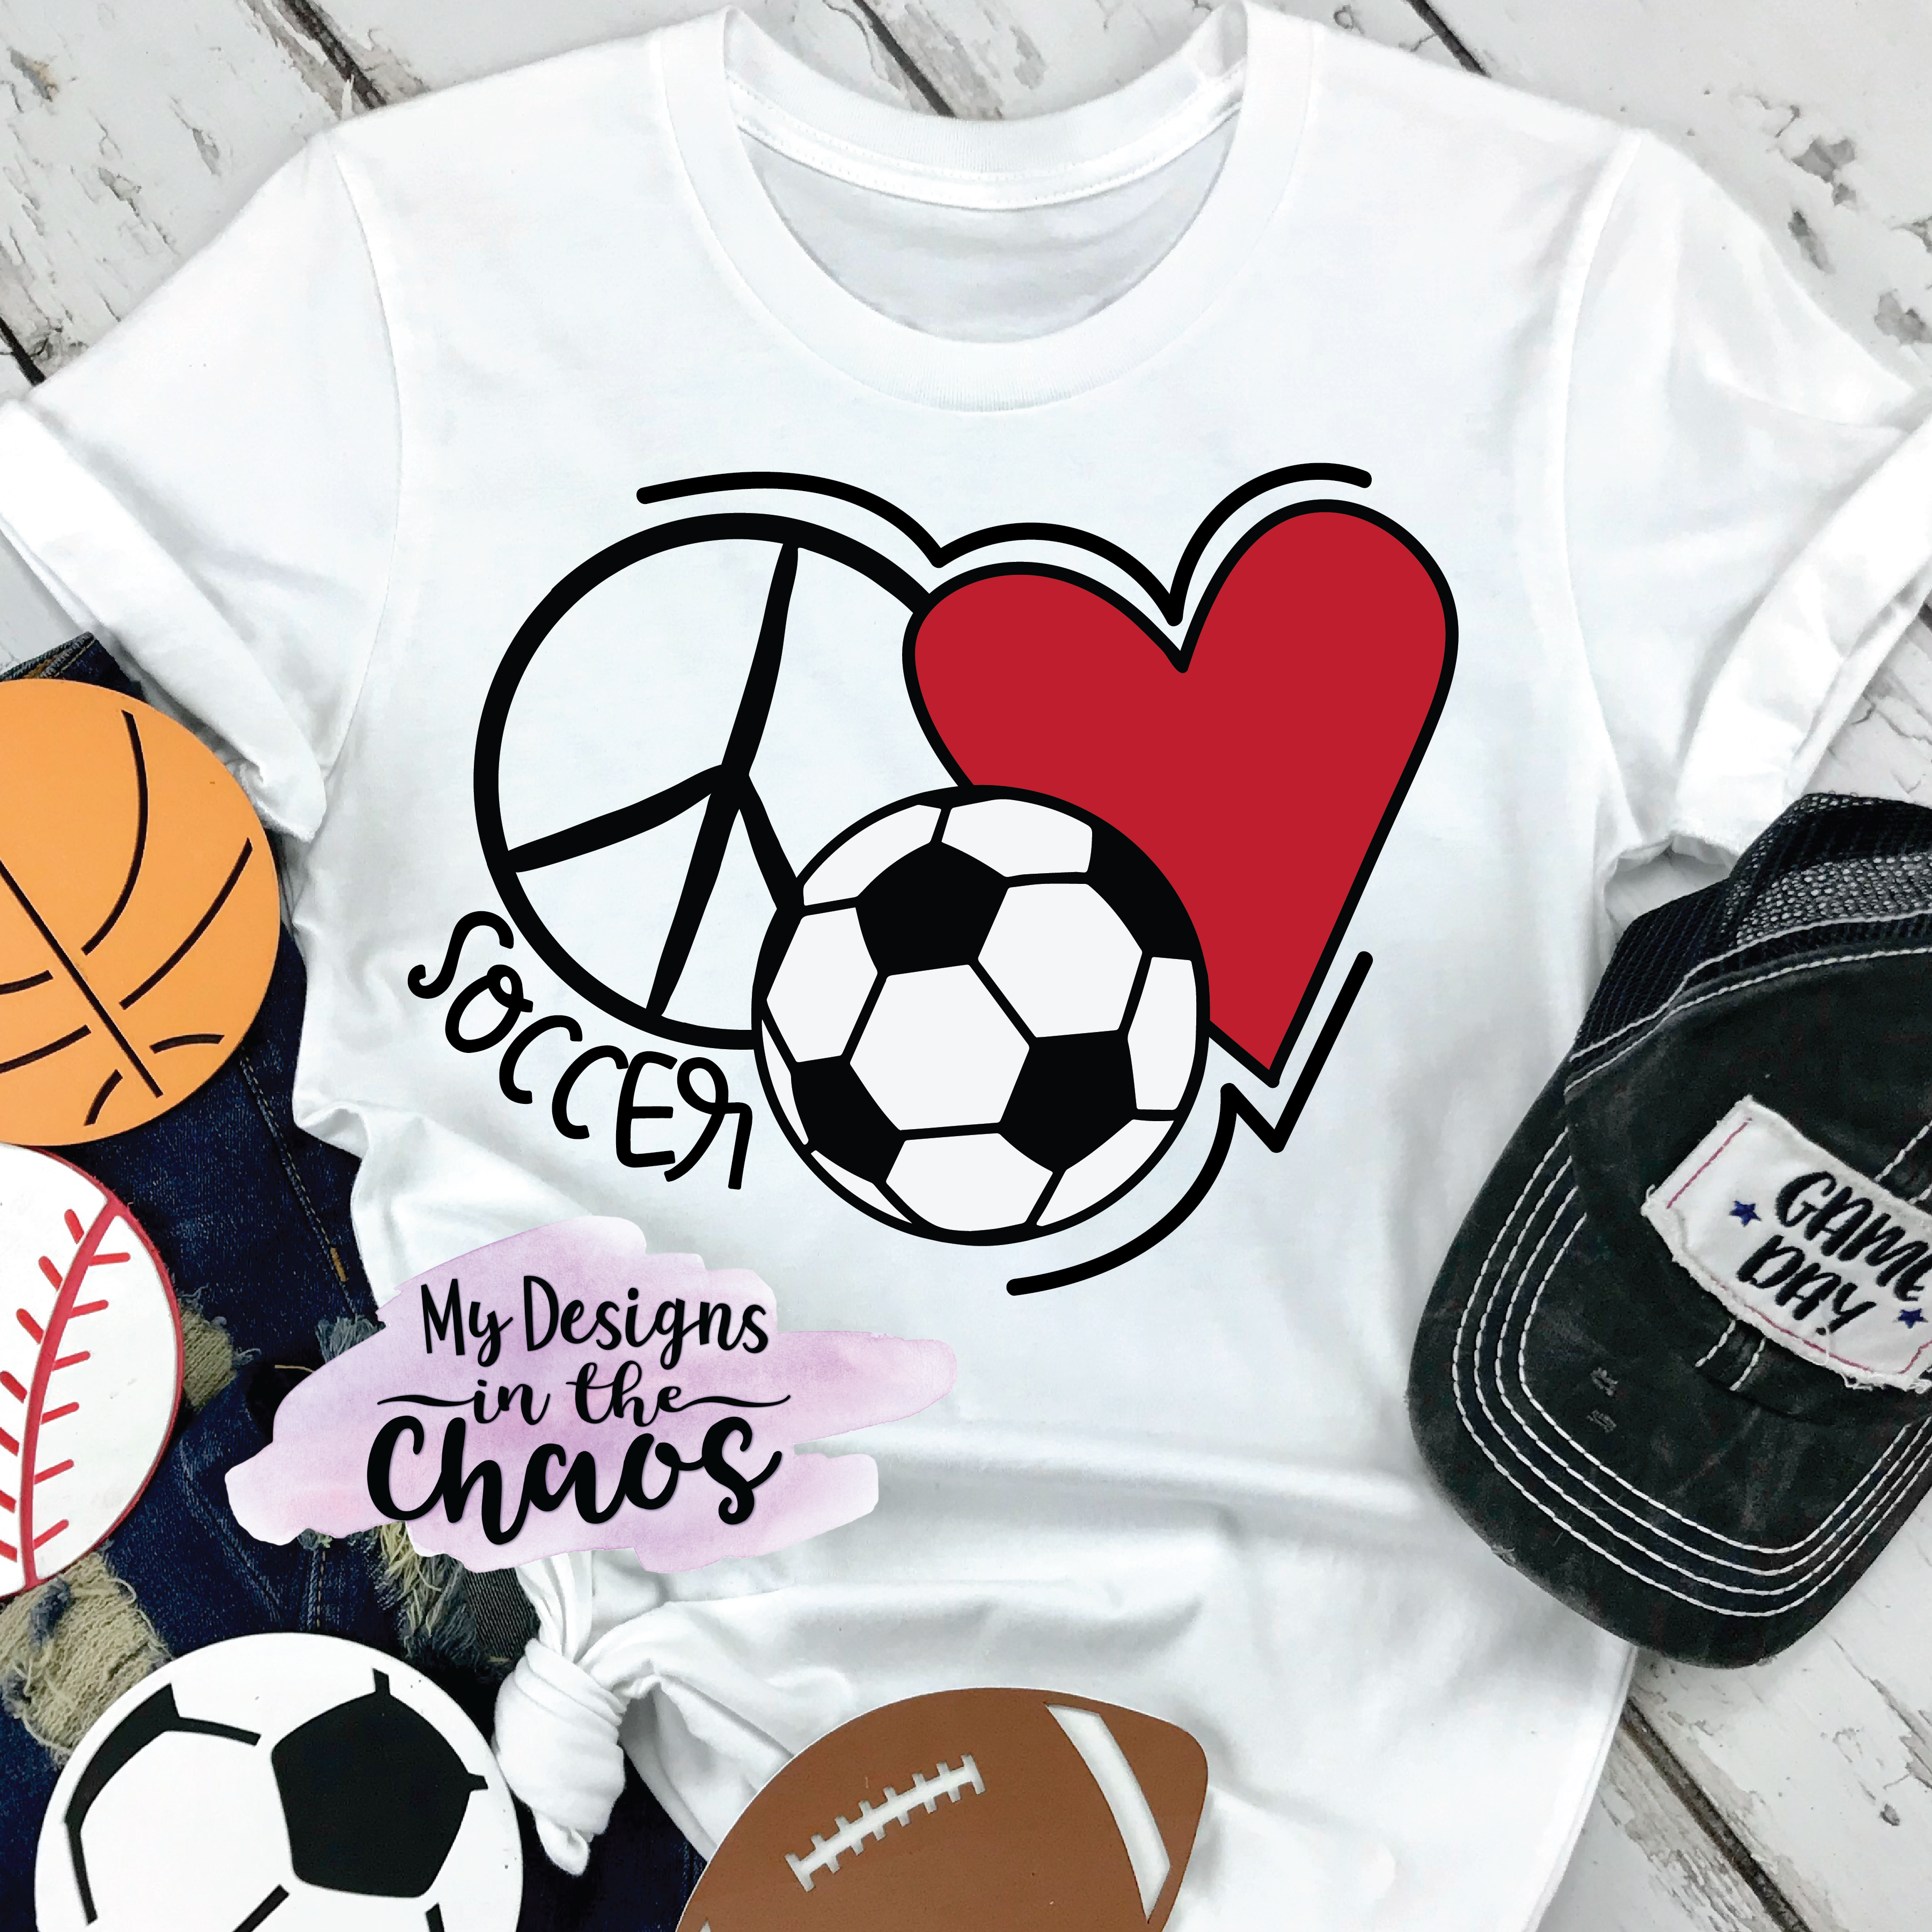 Peace Love and Soccer - My Designs In the Chaos